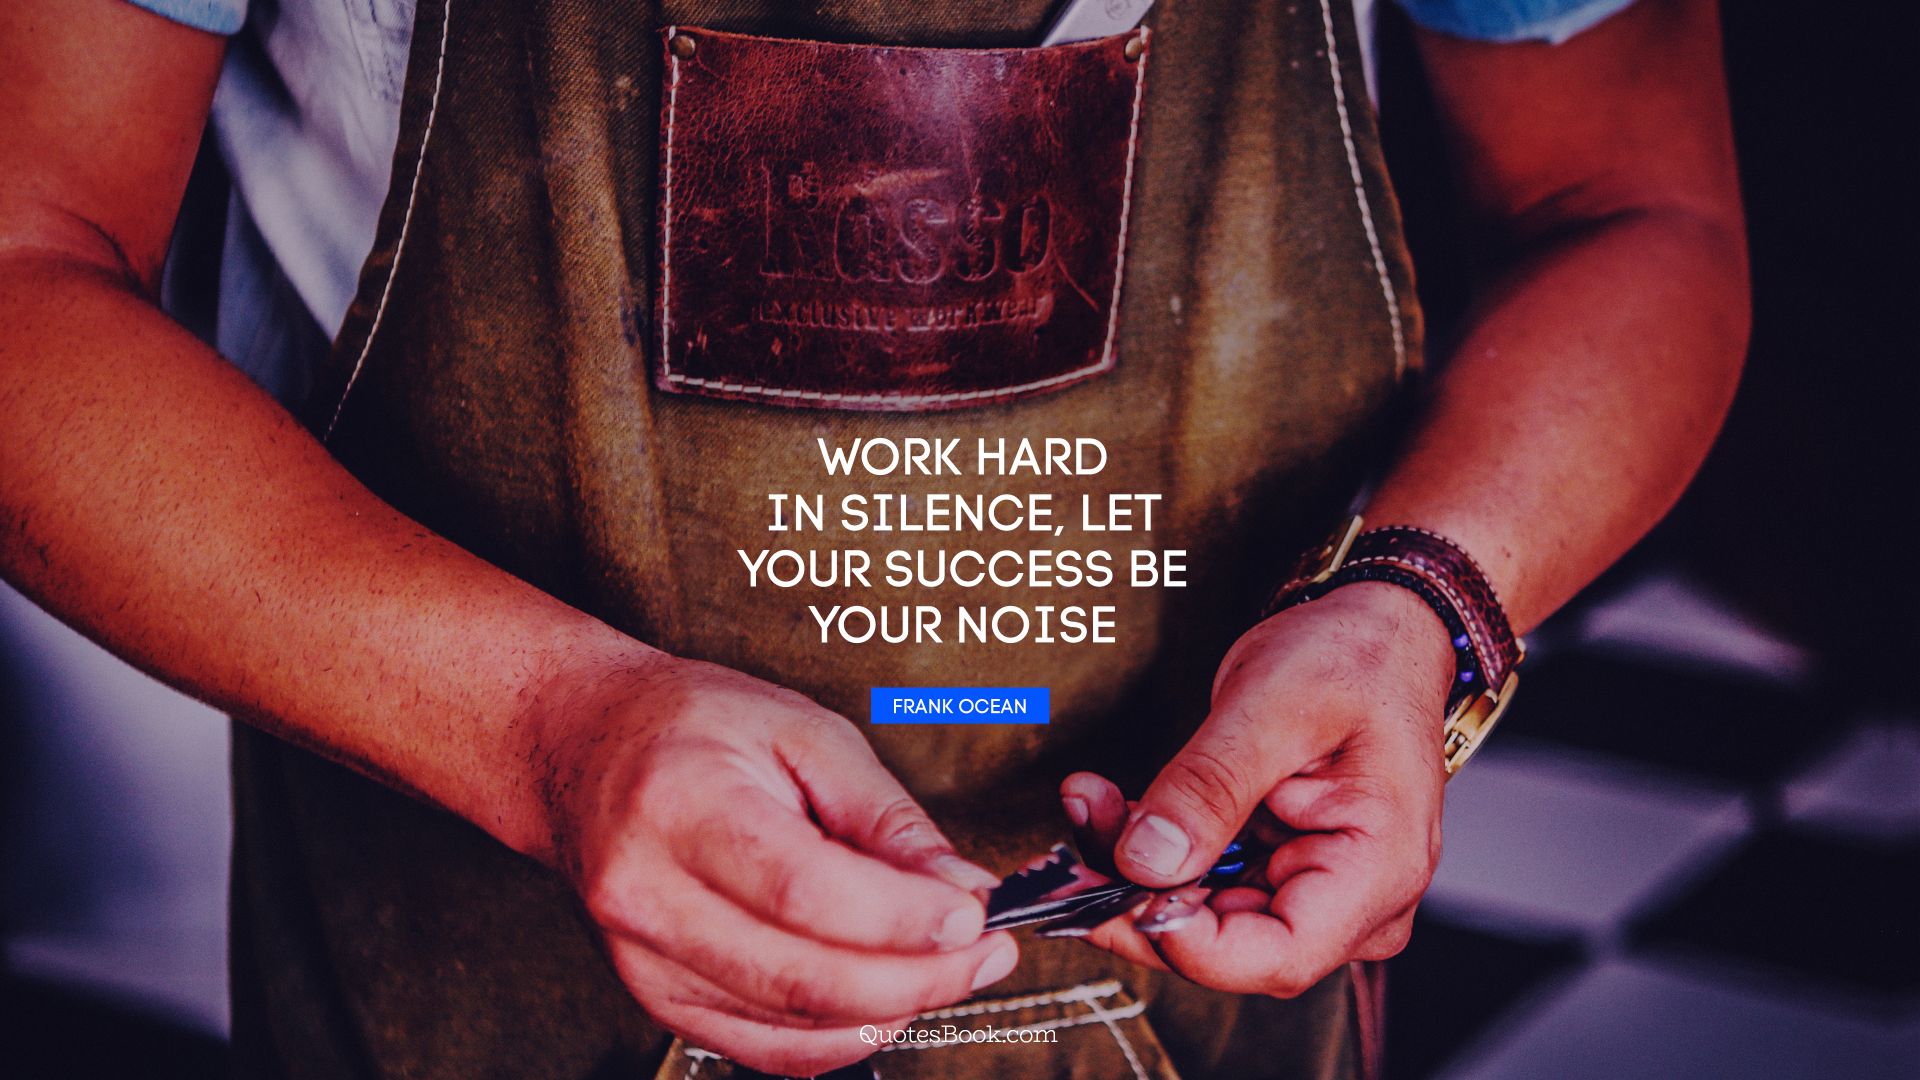 Work hard in silence, let your success be your noise. - Quote by Frank Ocean